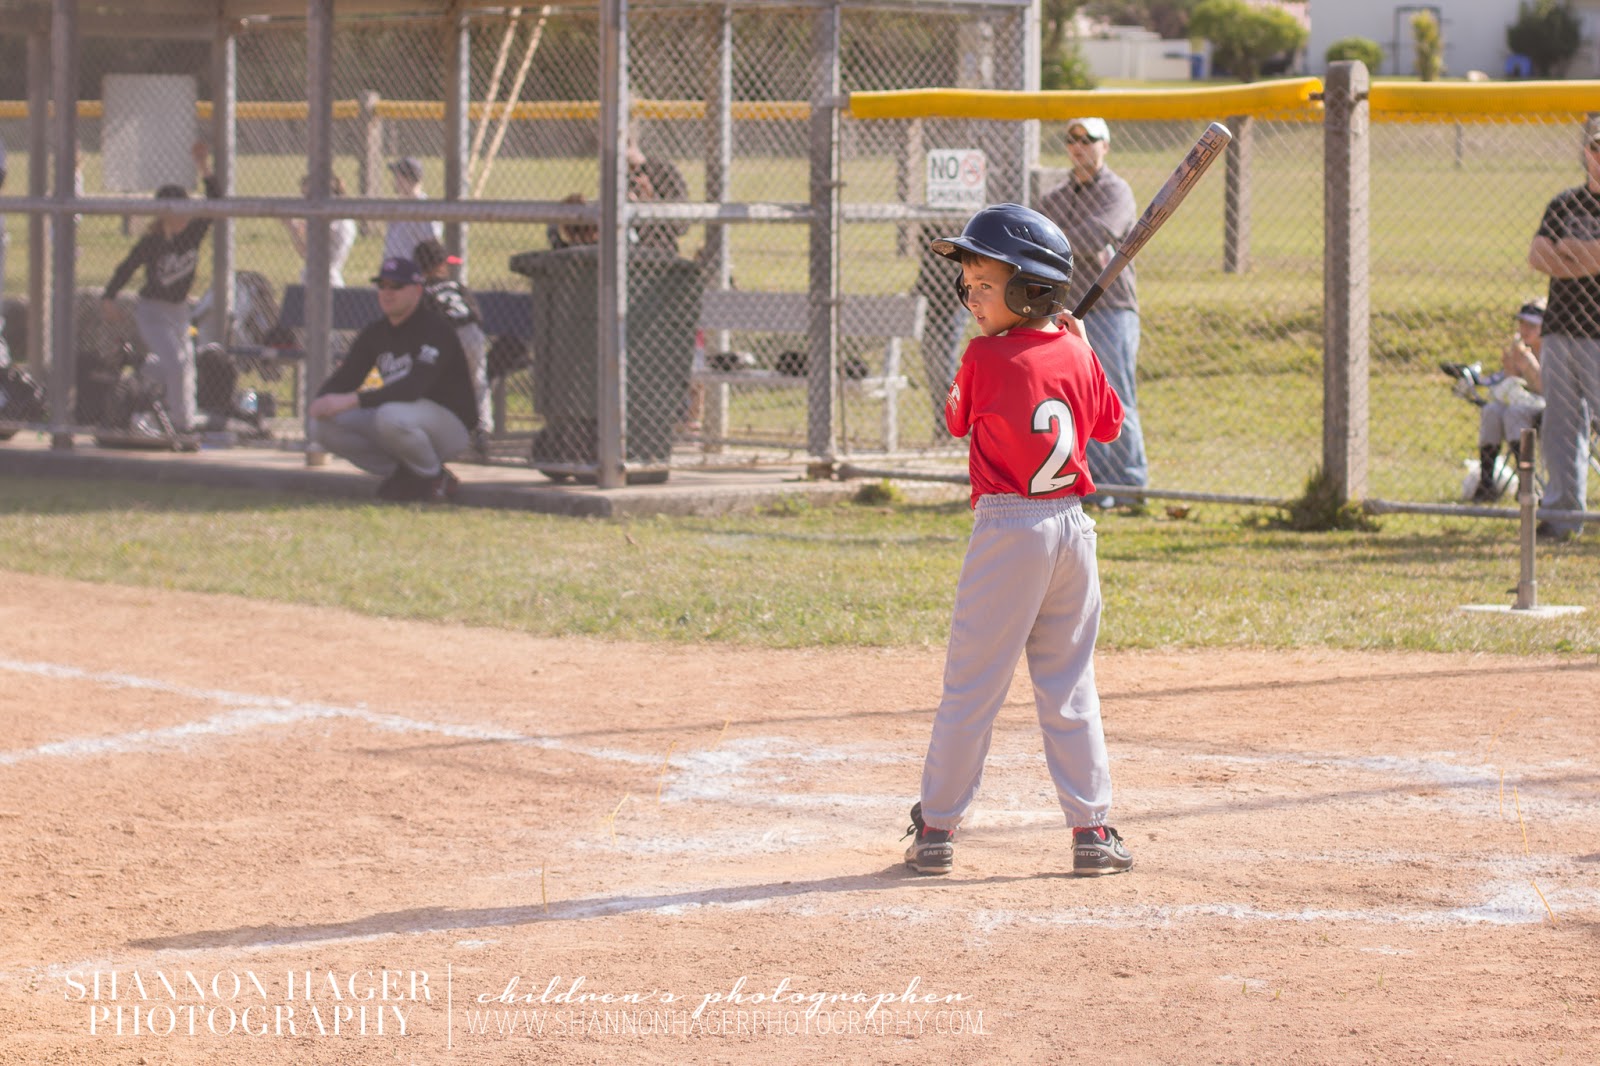 Children's Photography by Shannon Hager Photography, baseball